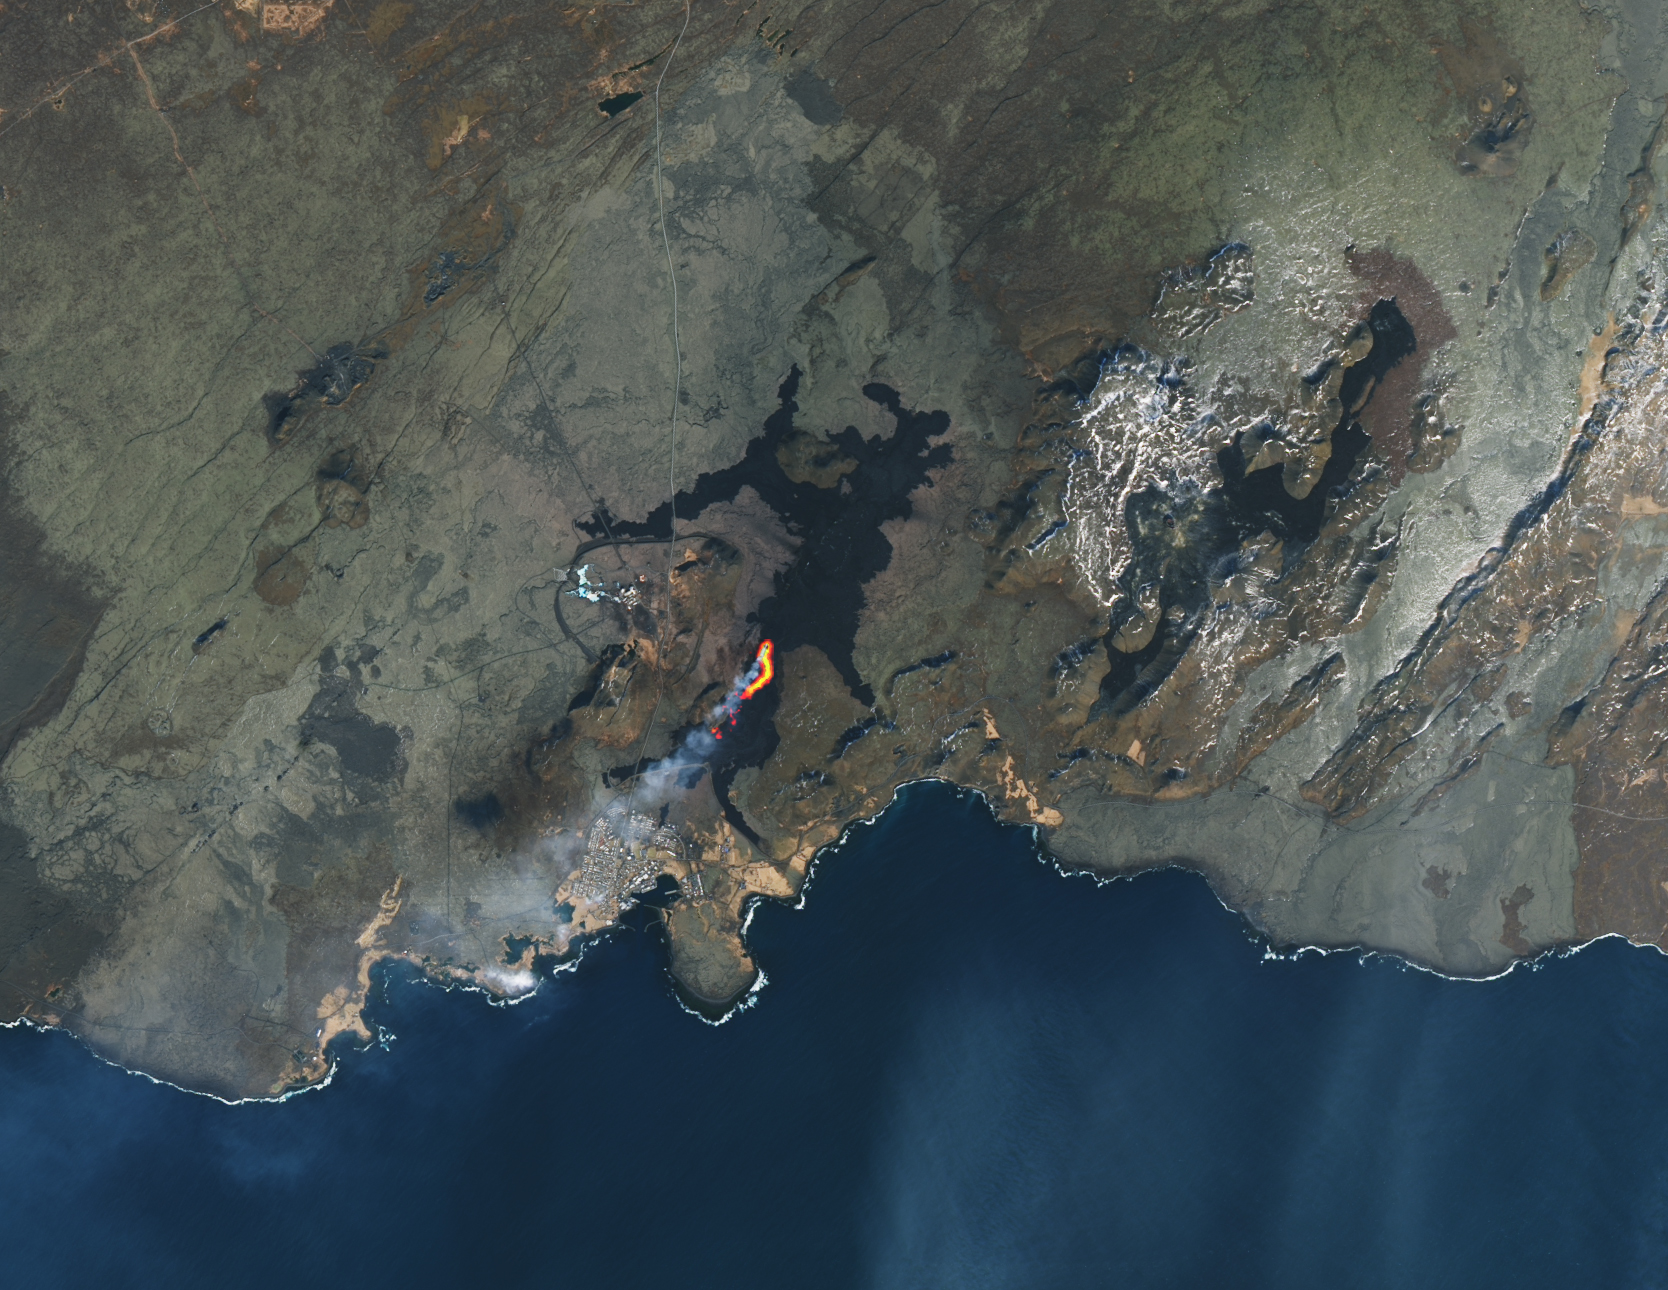 The natural color scene is overlaid with an infrared signal to help distinguish the lava’s heat signature. The active part of the fissure and the origin of a volcanic plume are apparent. This is seen in a bright orange slit centered in the image. Lava flows can be seen surrounding toward the top and right of the image where the land is largely empty. toward the bottom of the image is the coastline and the town of Grindavík along a small portion of the coast.